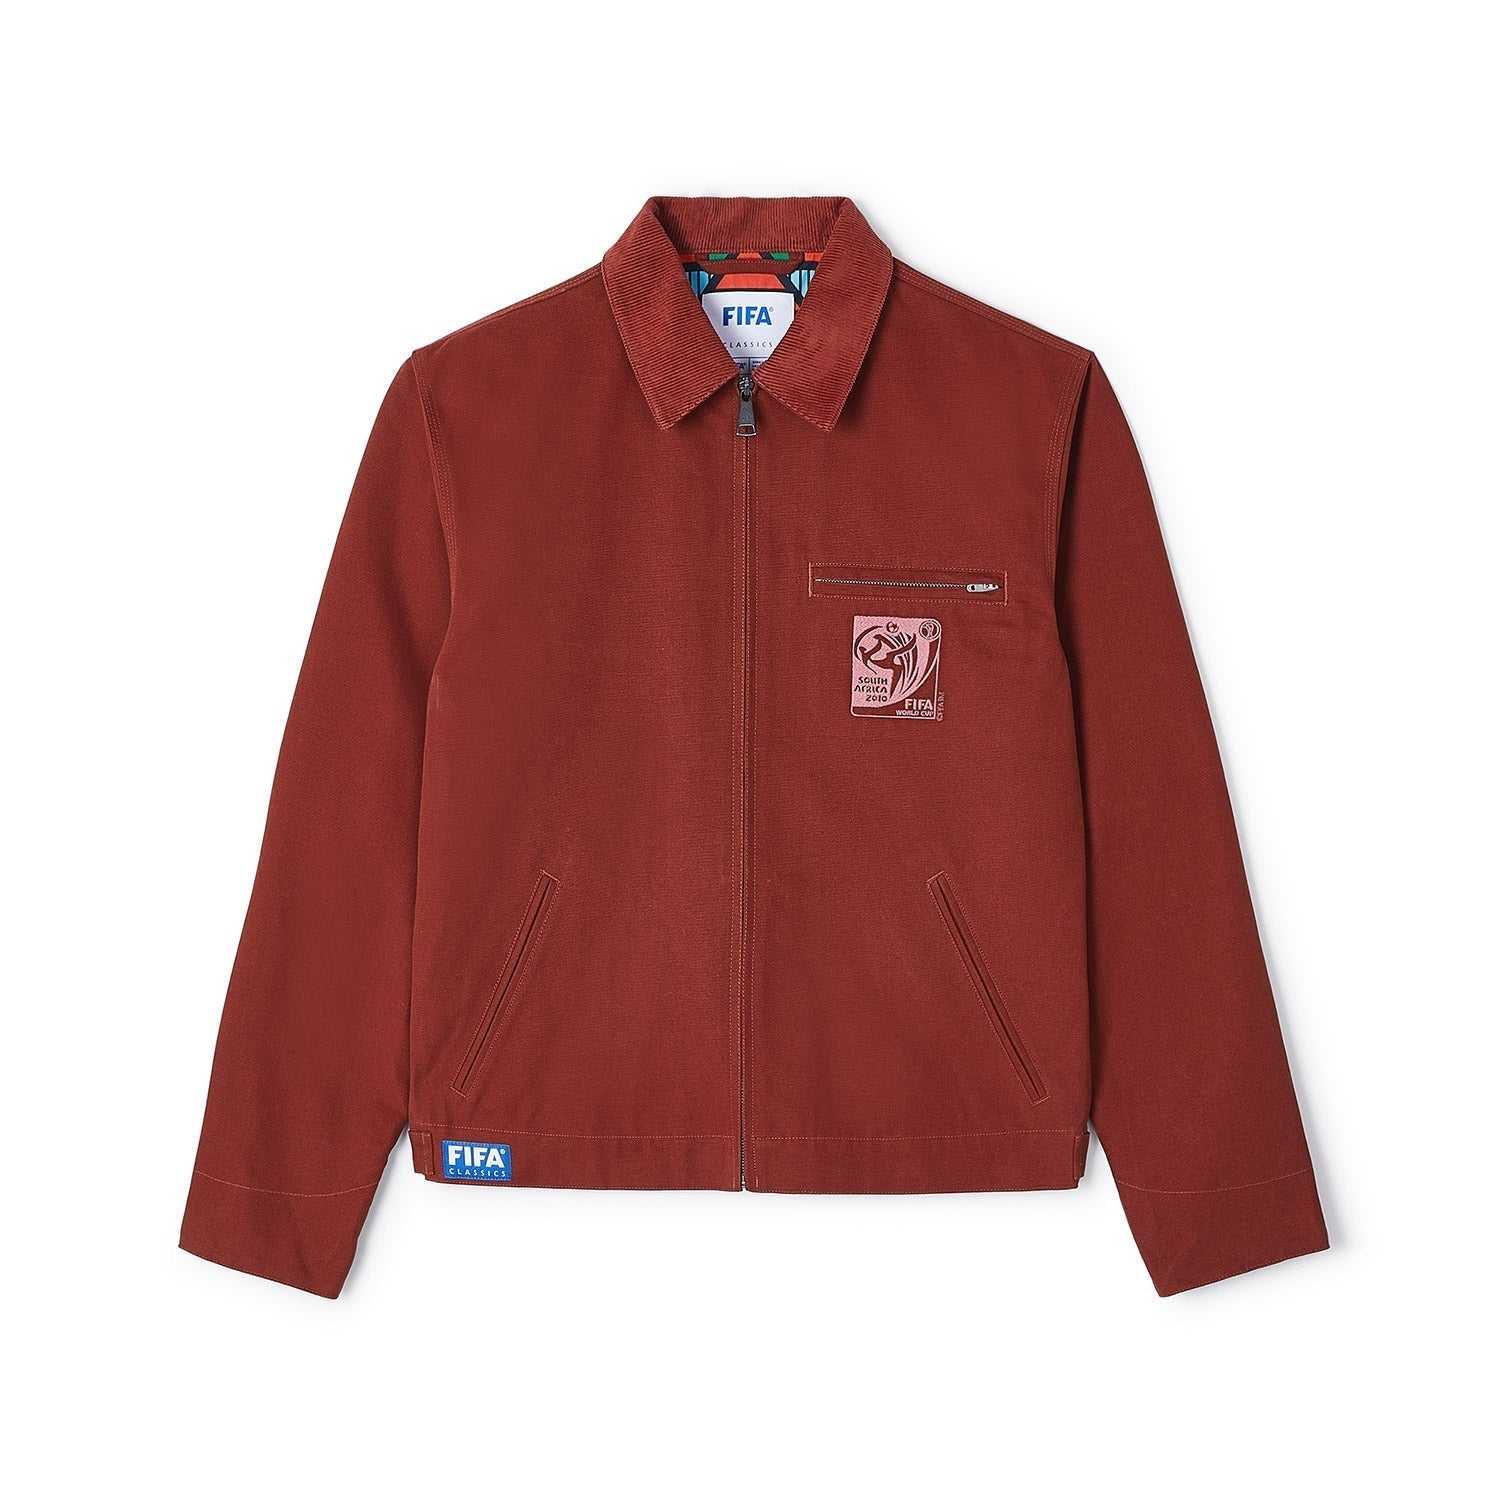 FIFA Rewind South Africa '10 Red Jacket - Mens